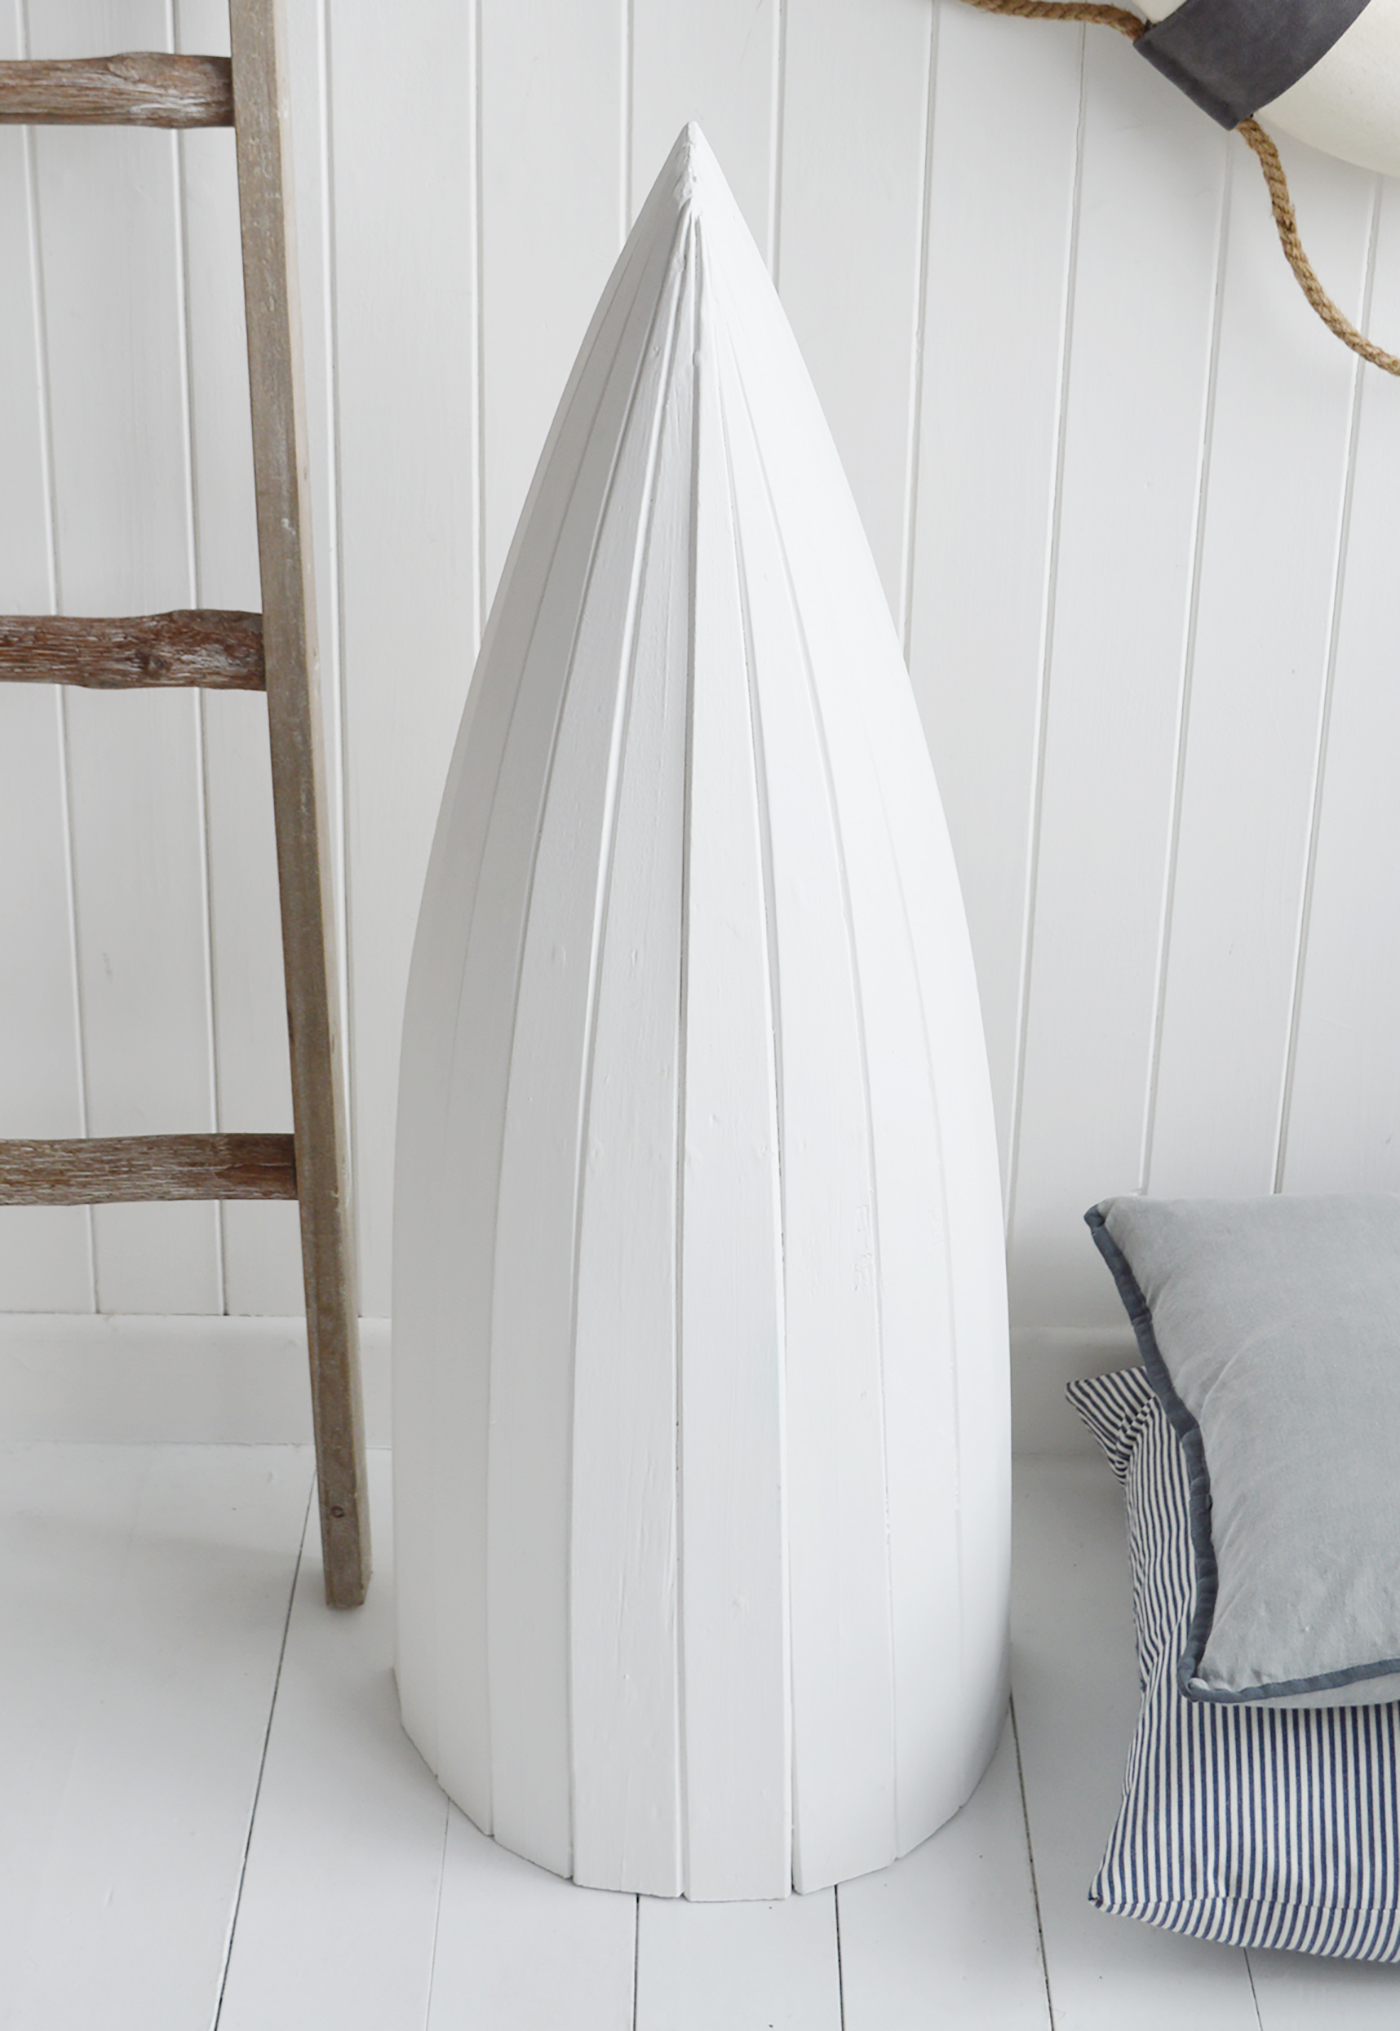 White Wooden Boat Shelf Unit - New England Coastal furniture andf Interiors from The White Lighthouse